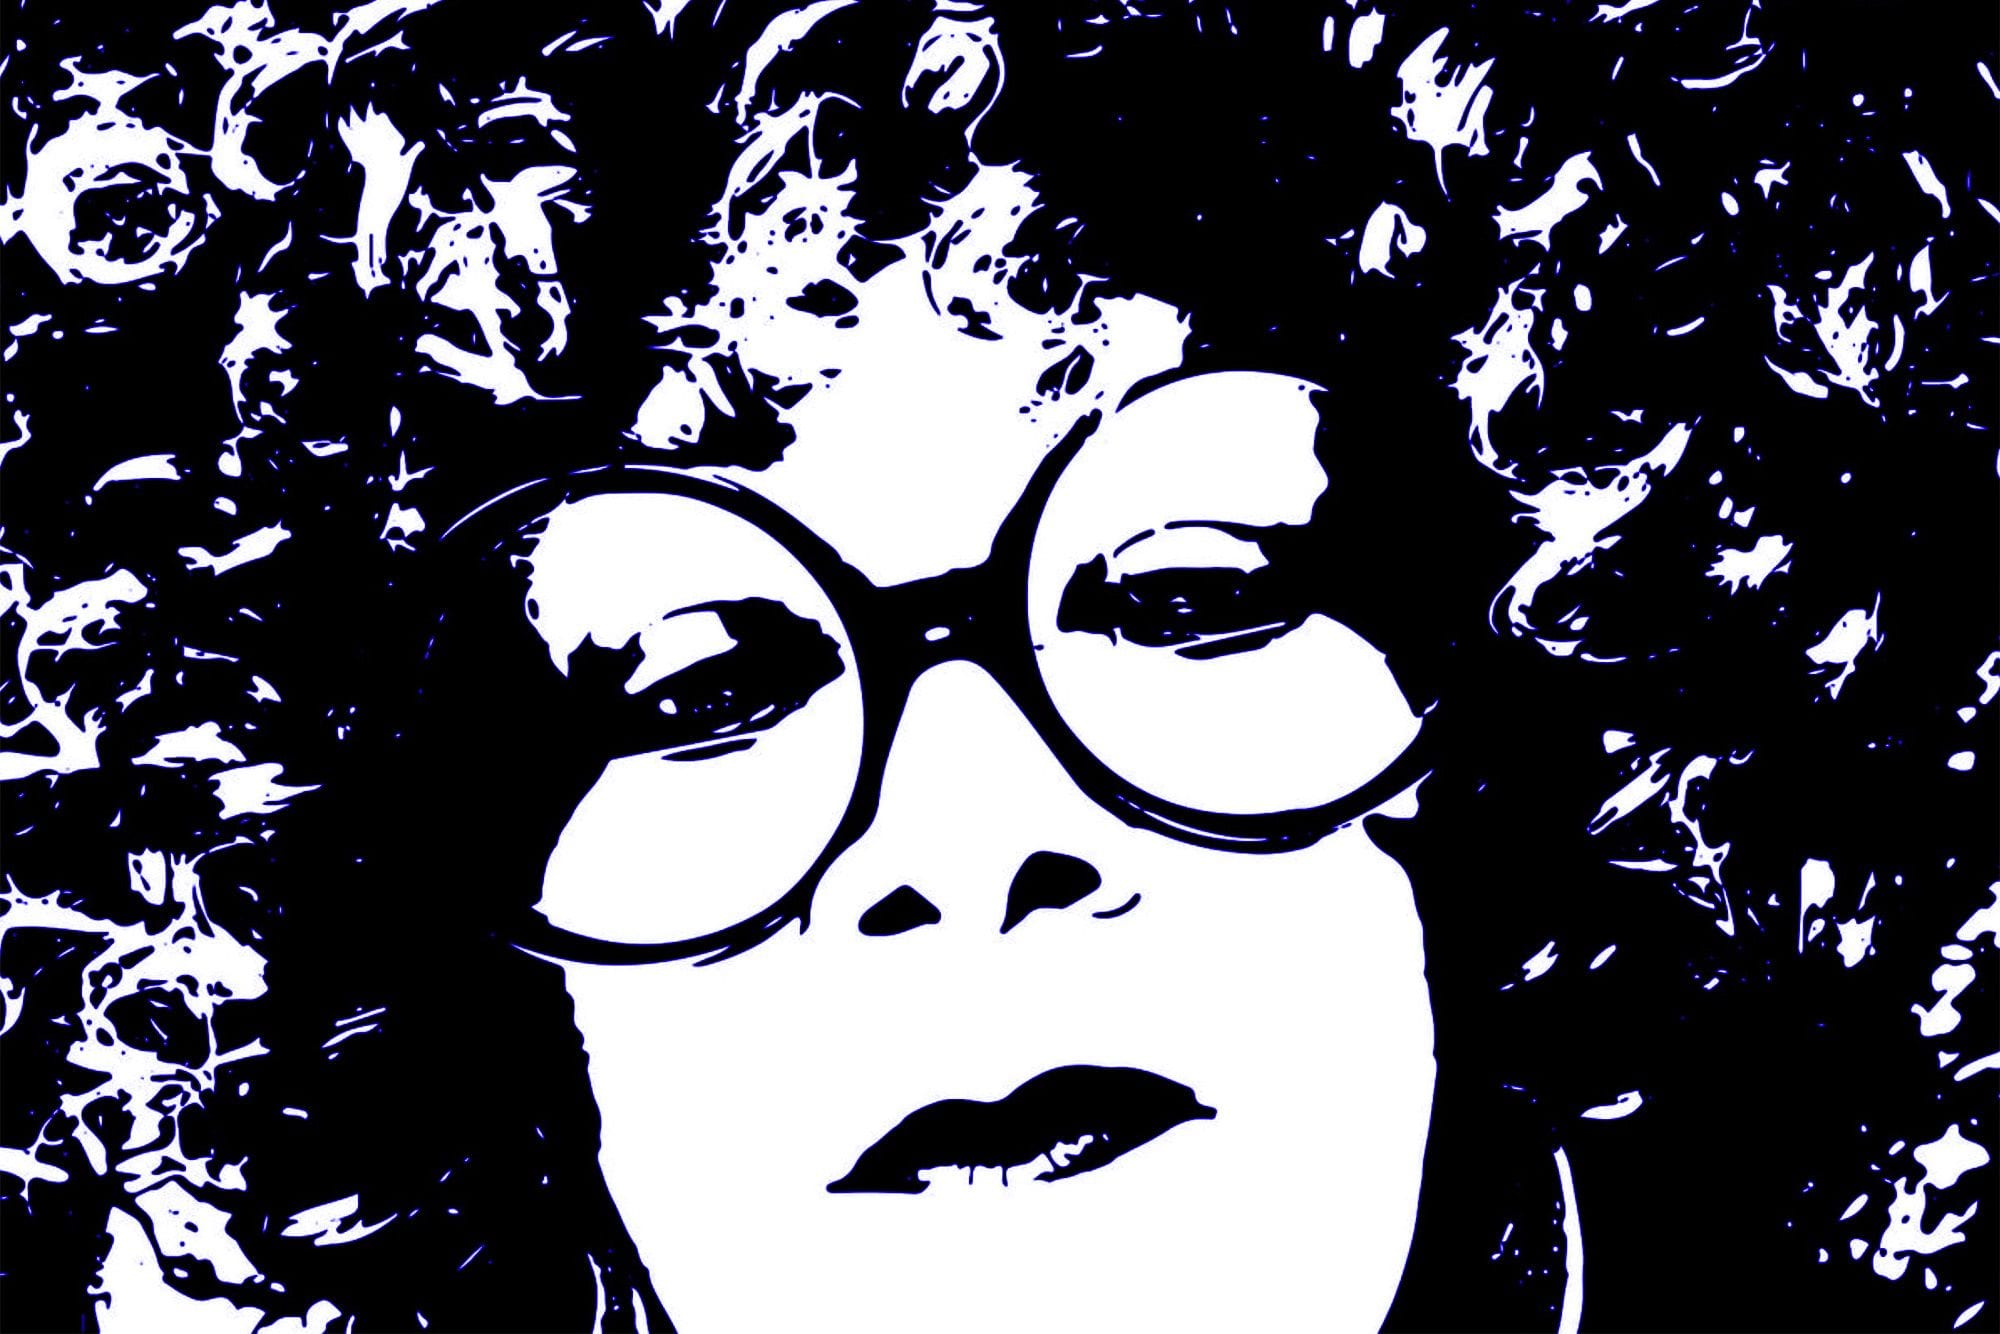 Jaki Shelton Green Blends Poetry and Protest on Timely ‘The River Speaks of Thirst’